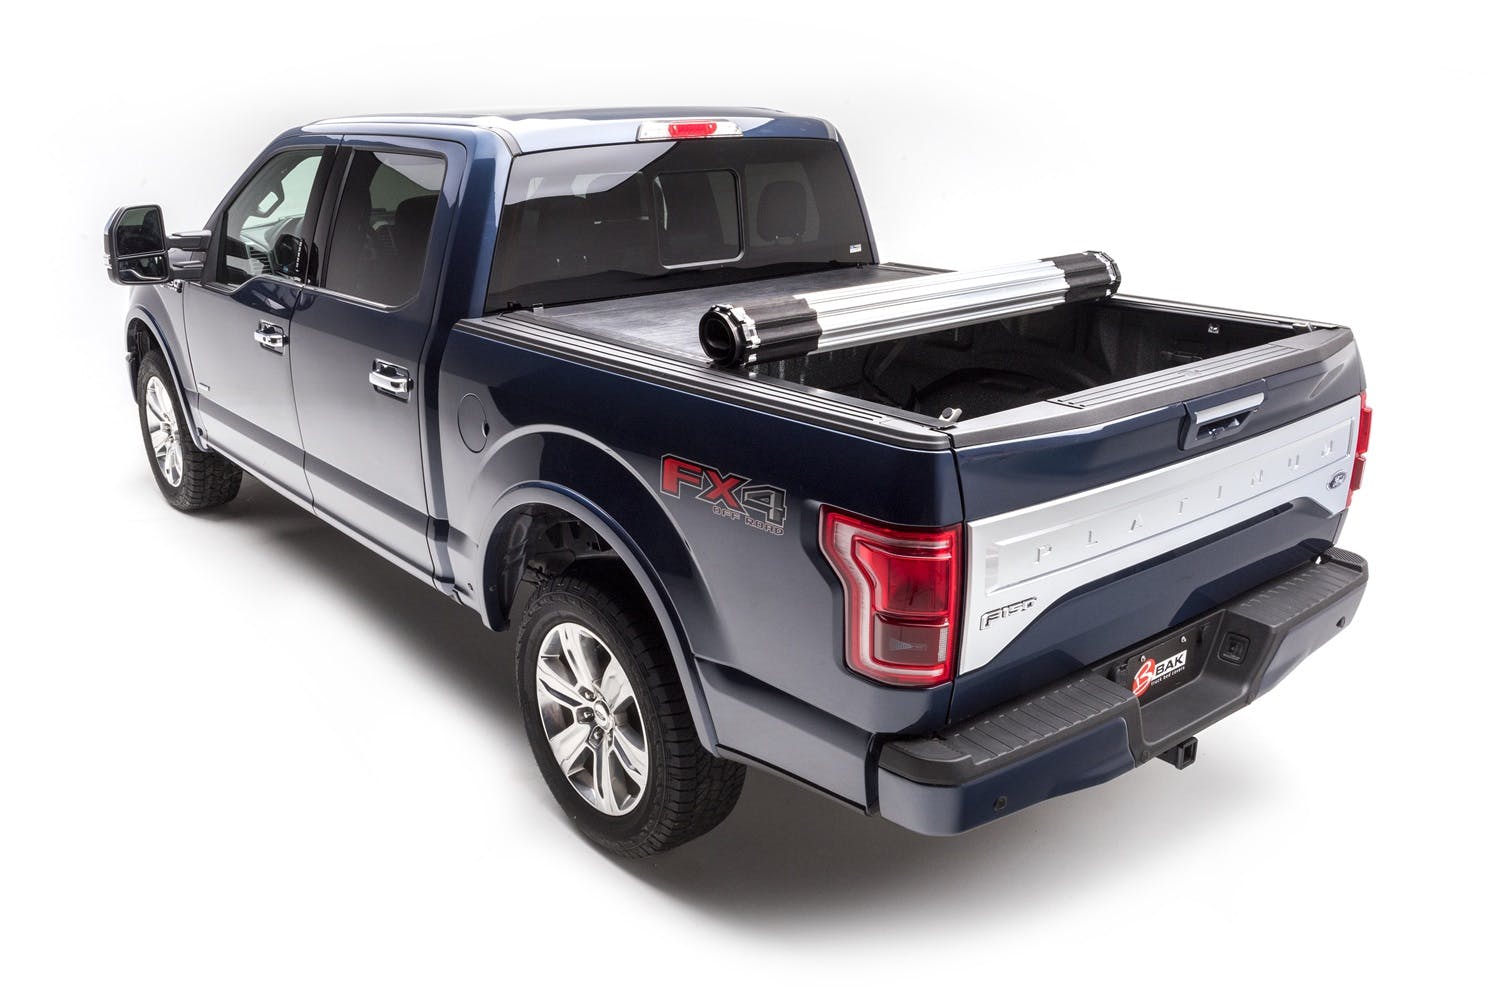 BAK Industries 39329 Revolver X2 Hard Rolling Truck Bed Cover